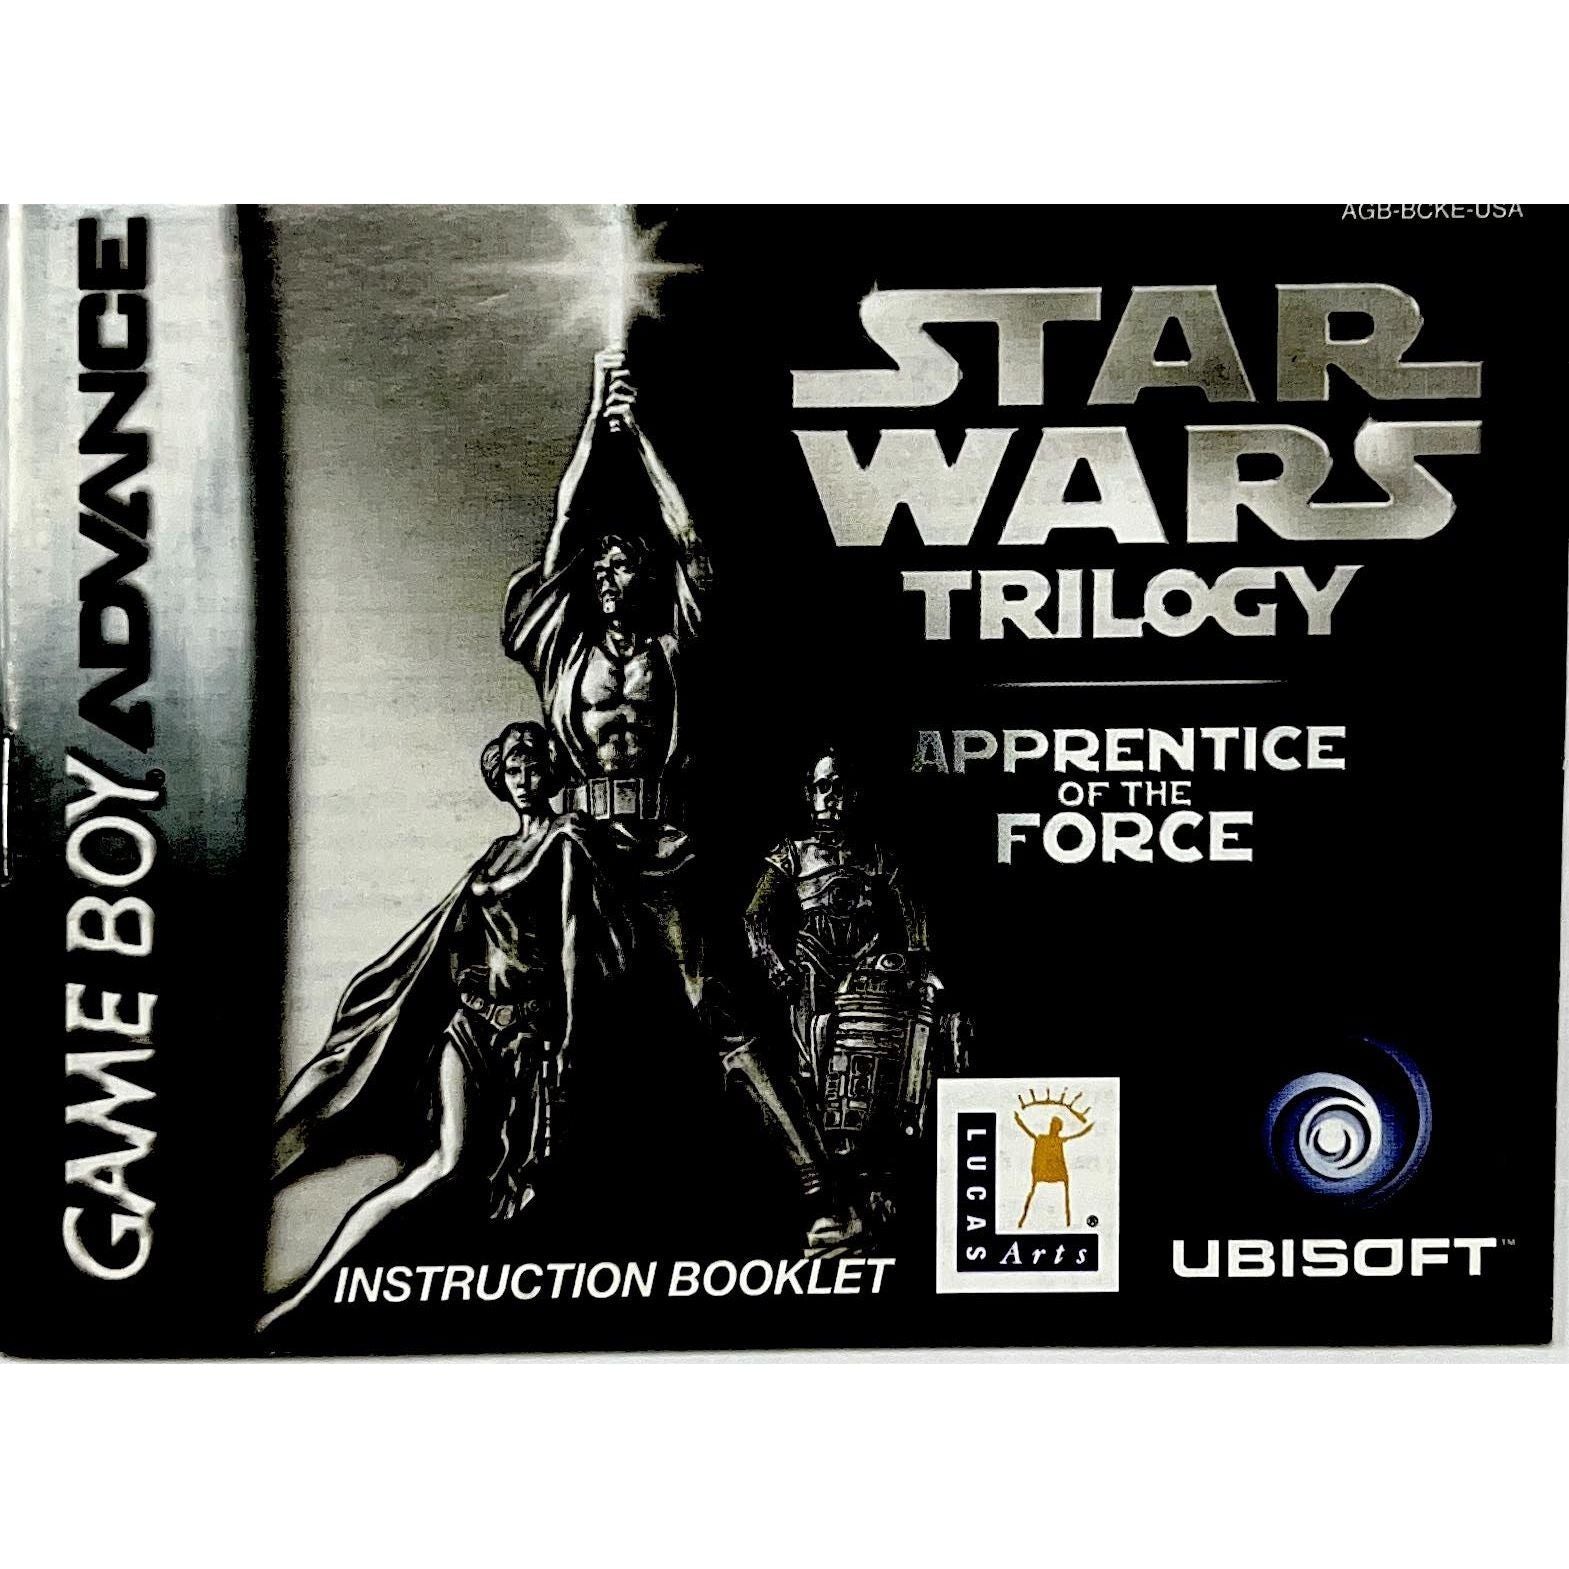 GBA - Star Wars Trilogy Apprentice of the Force (Manual)